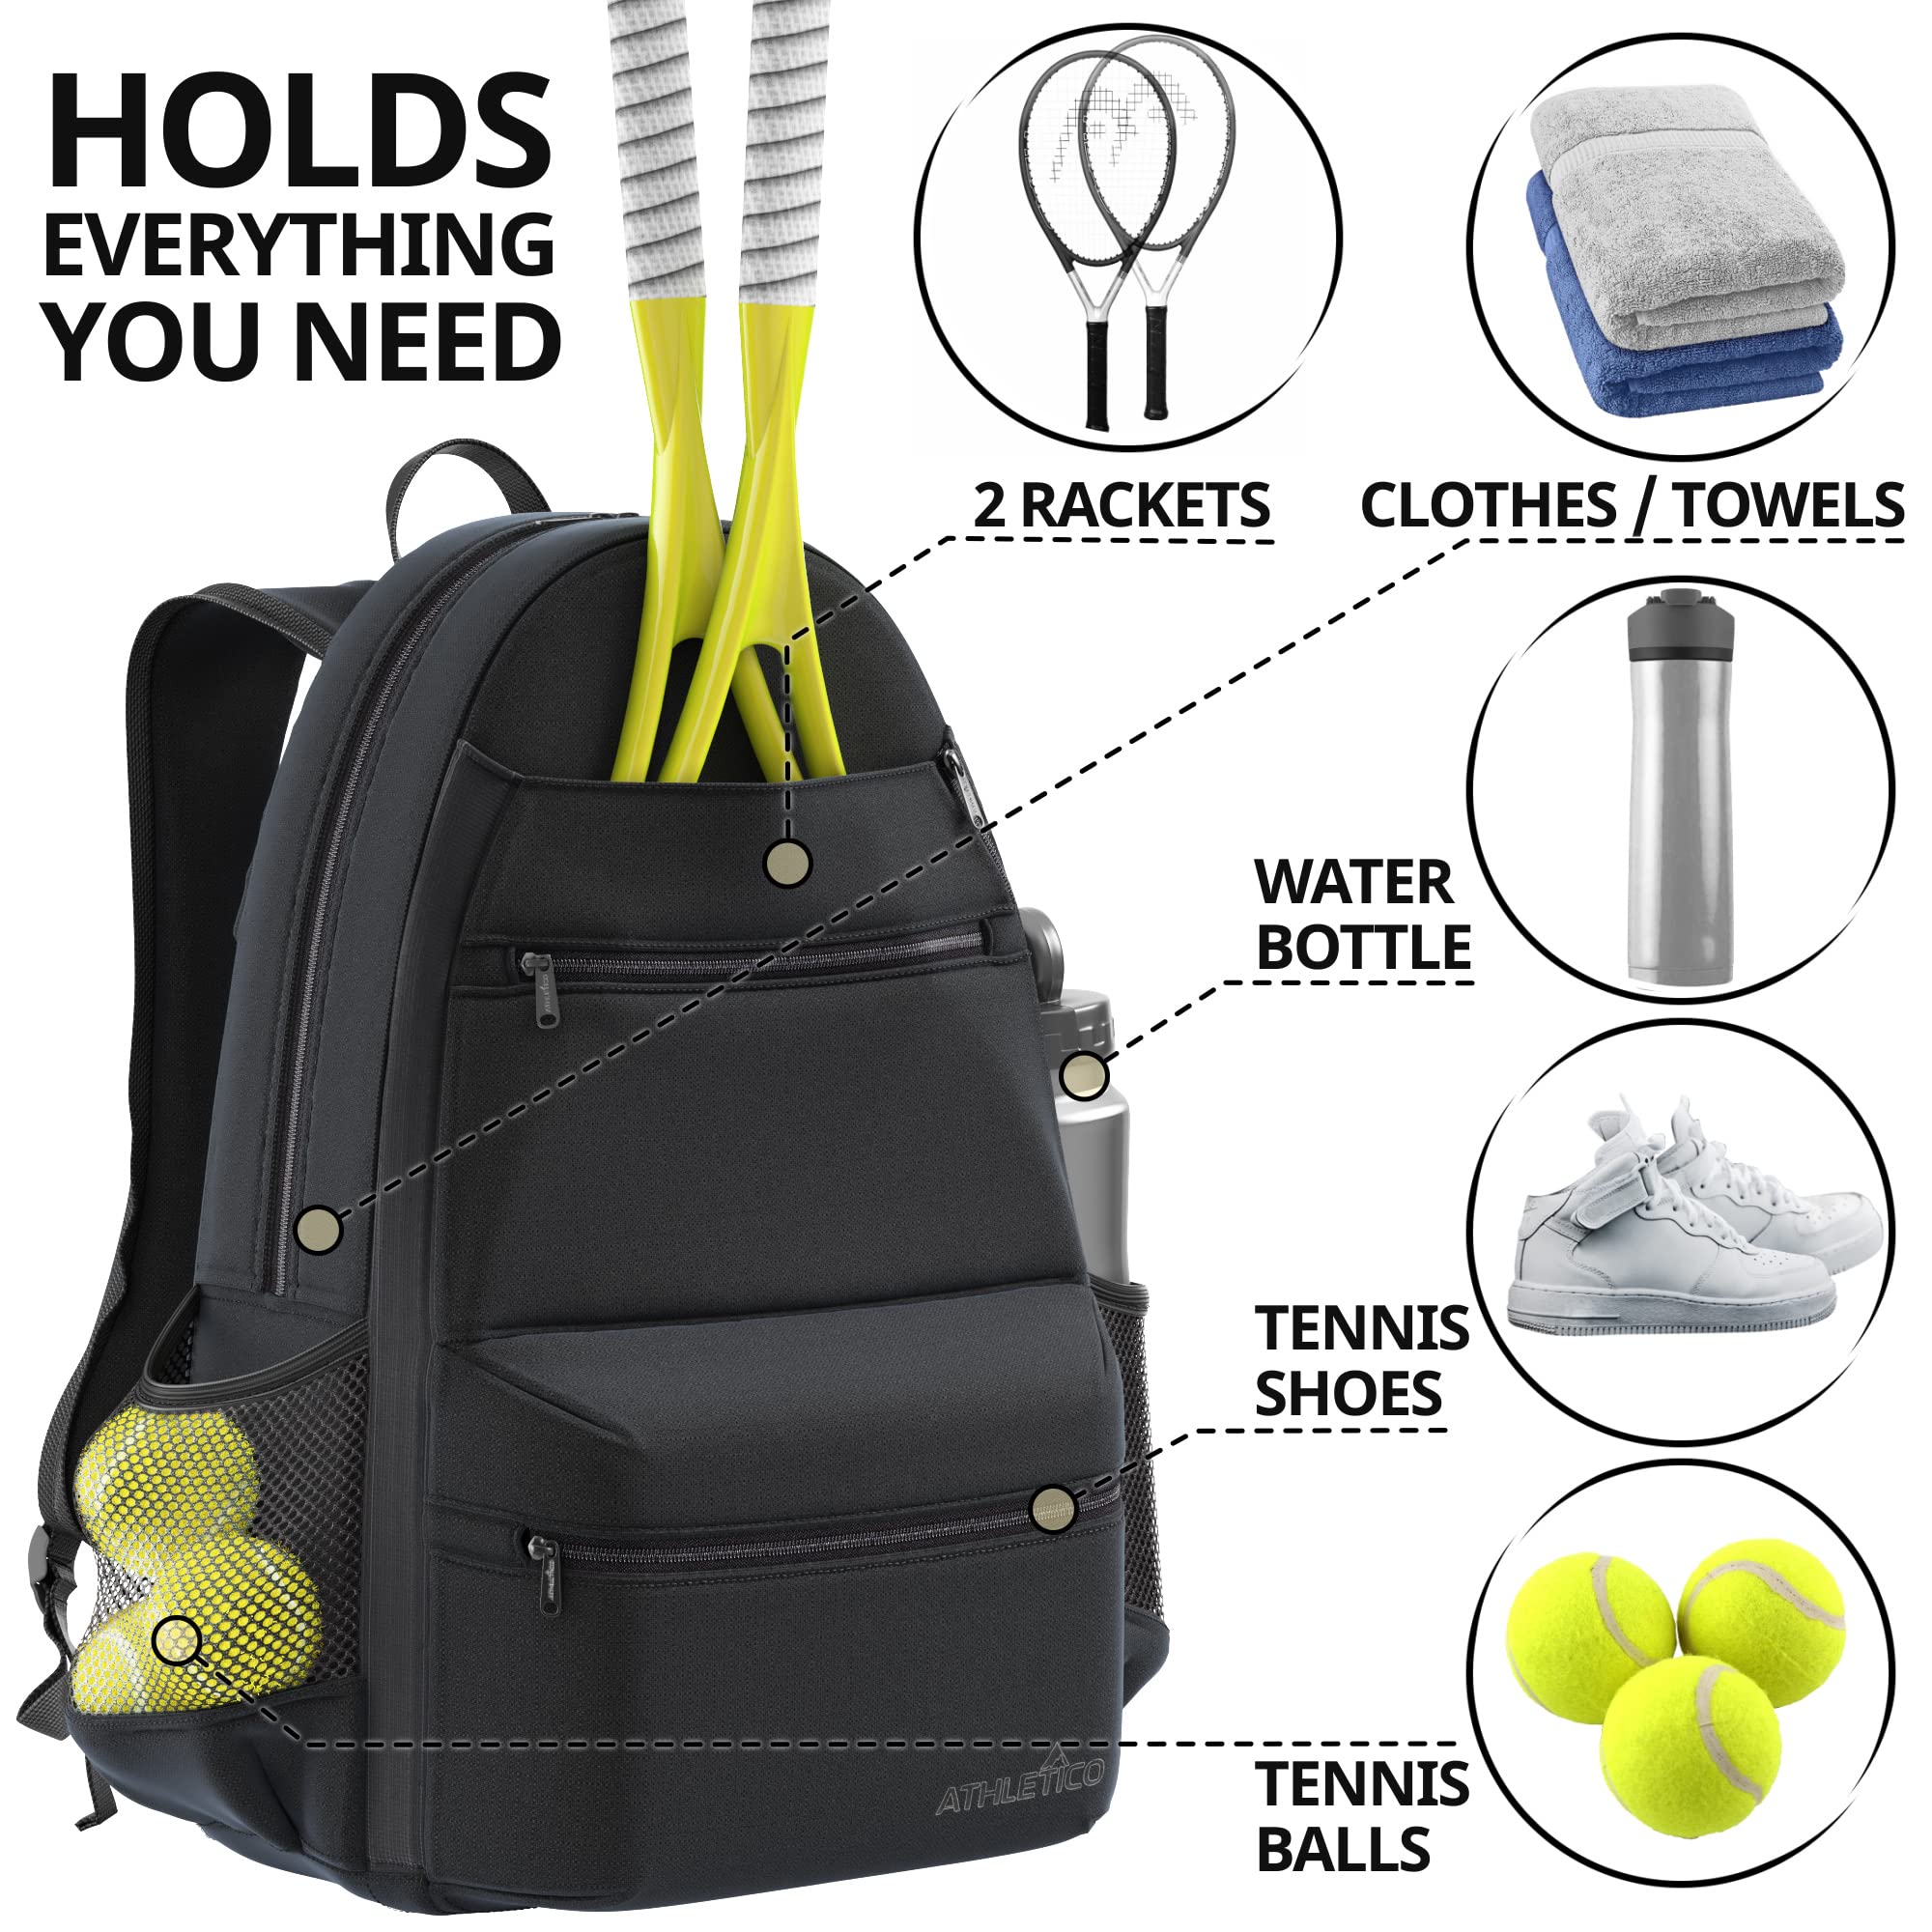 Athletico City Tennis Bag - Tennis Backpack for Men & Women Holds 2 Tennis Rackets and Shoes - Tennis Bags With Racquet Holder For Tennis, Pickleball, Squash & Badminton - Tennis Bags for Women  - Good